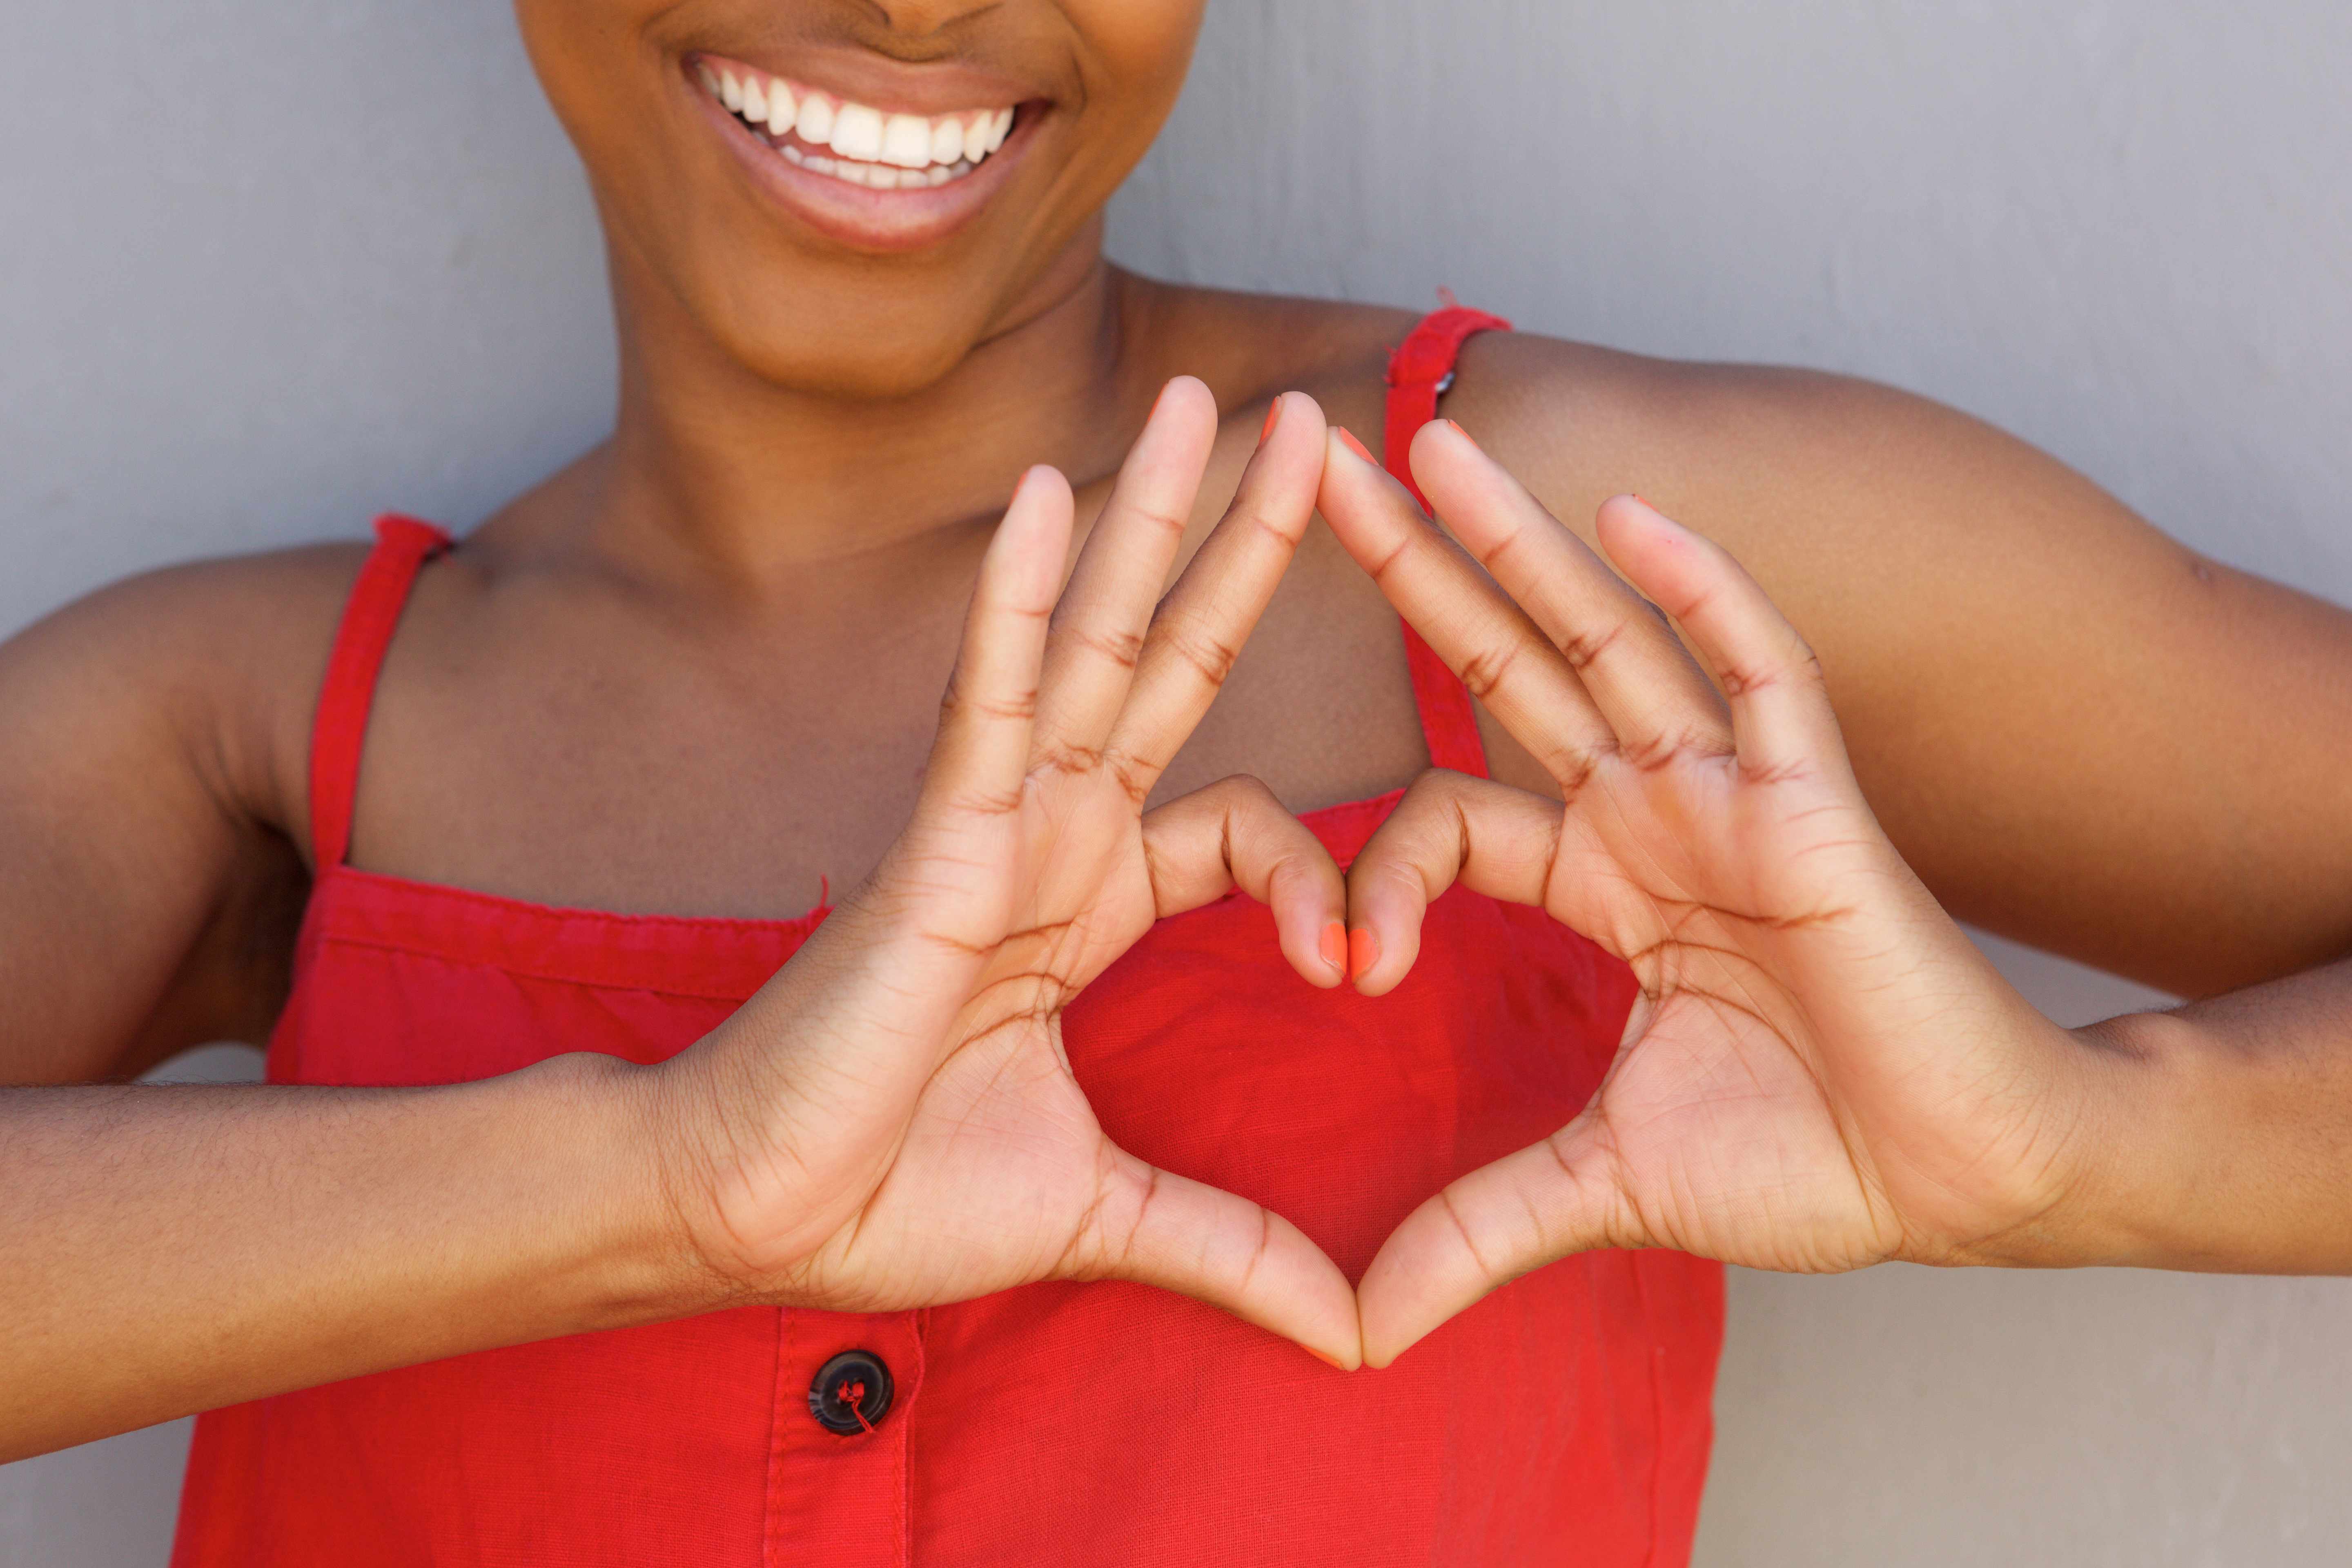 an African-American woman in a red shirt smiling and forming her hands in the shape of a heart